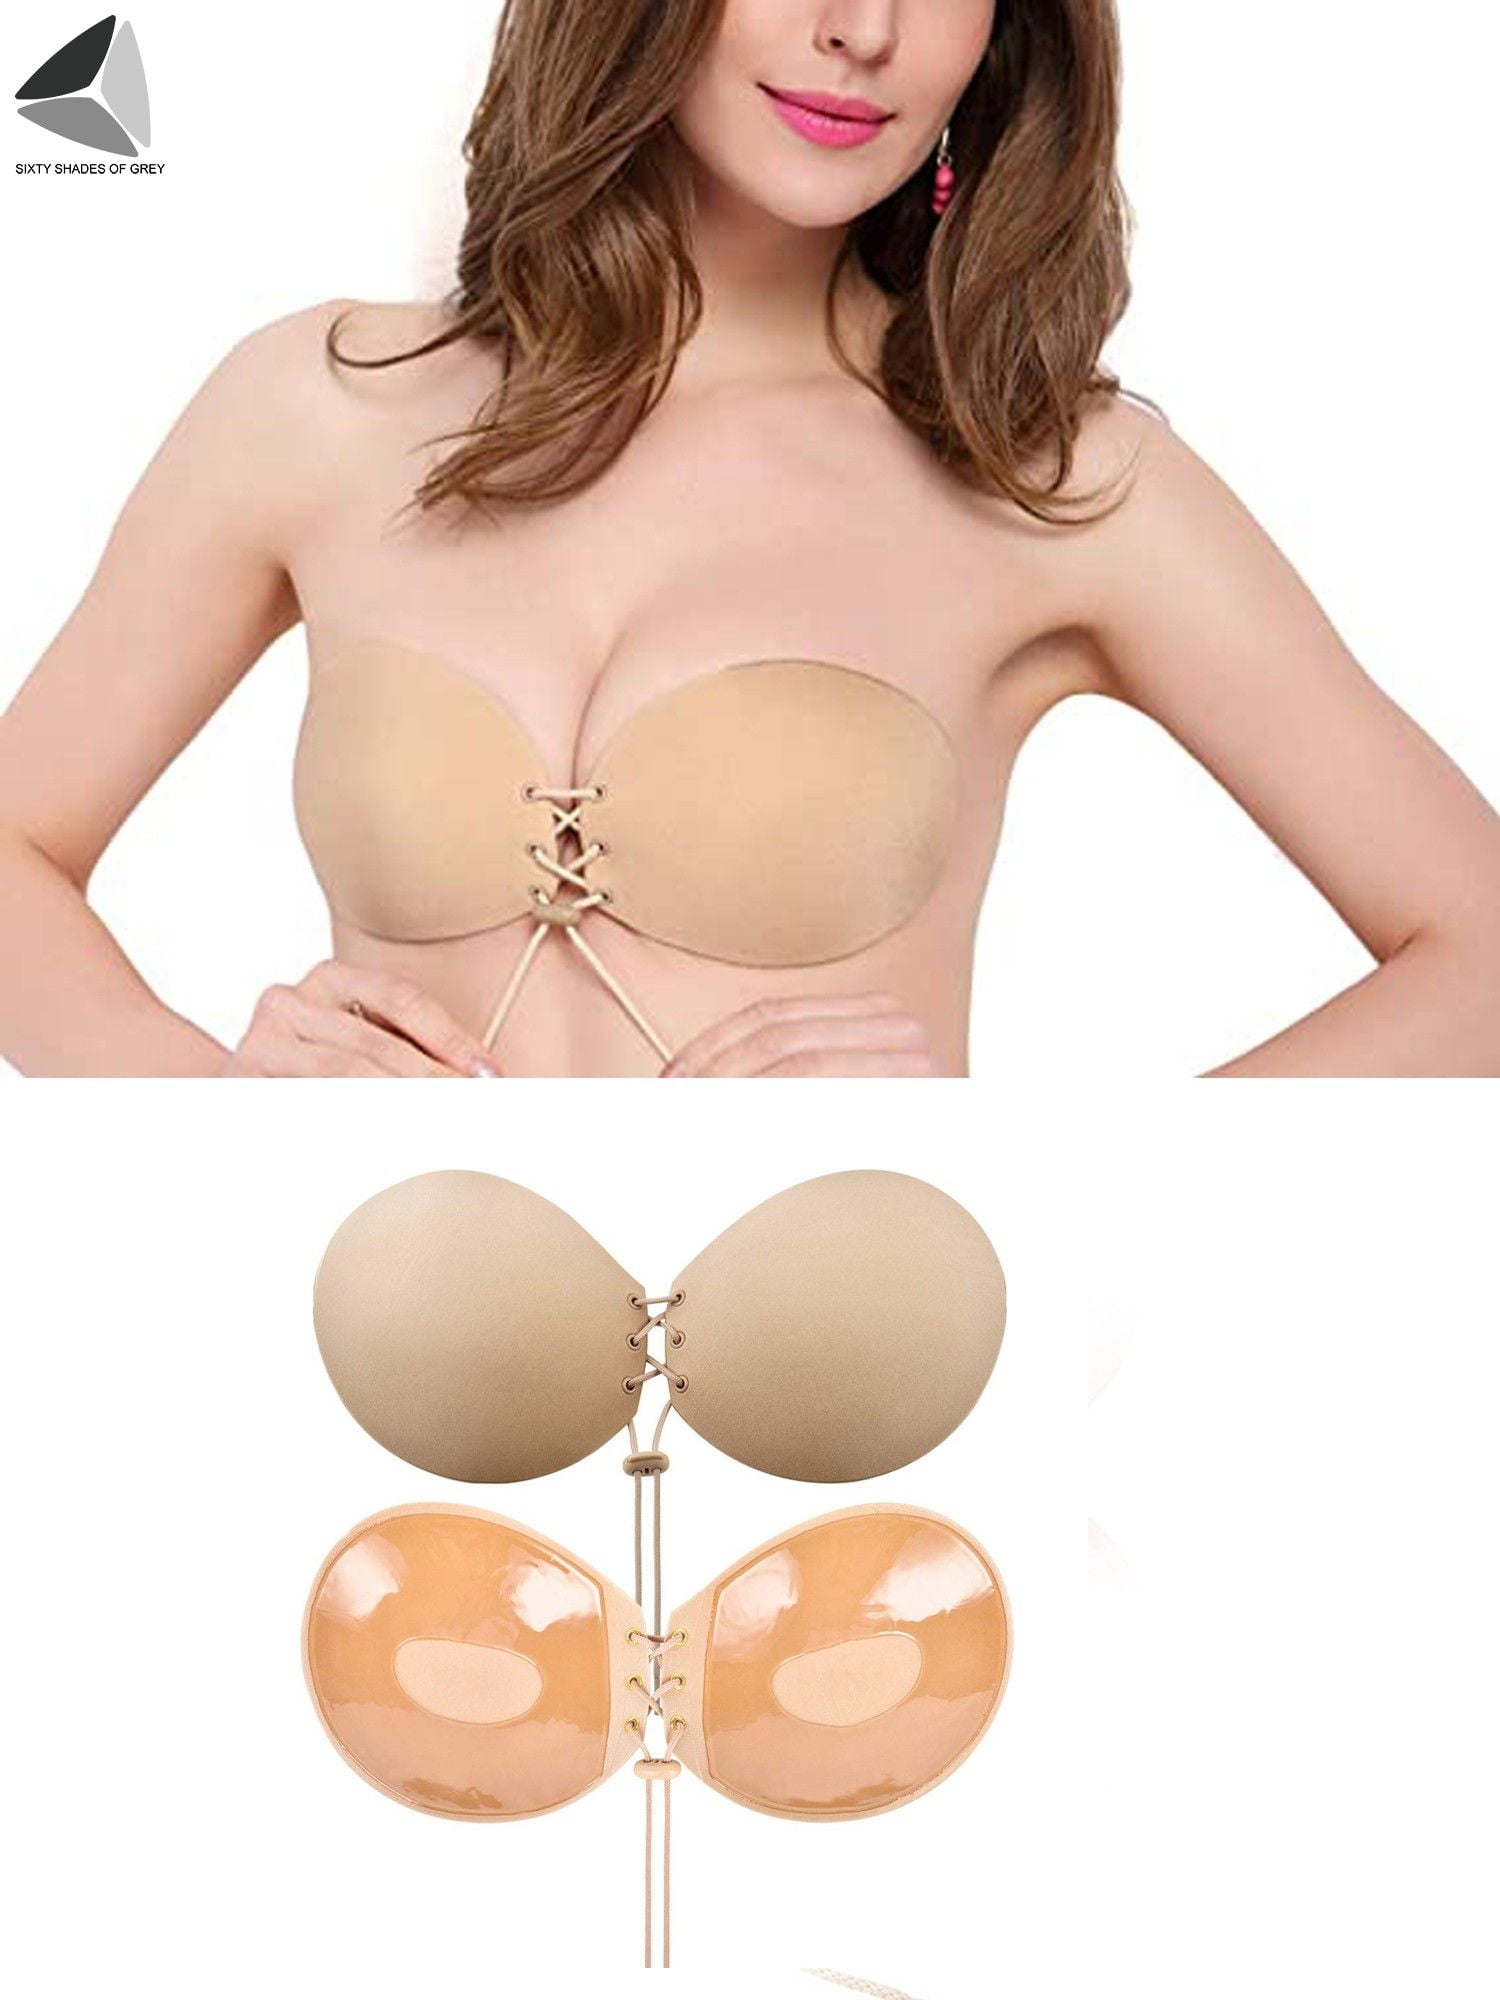 Buy AARAM Big Size Adhesive Stick on Bra for Cup G Skin at